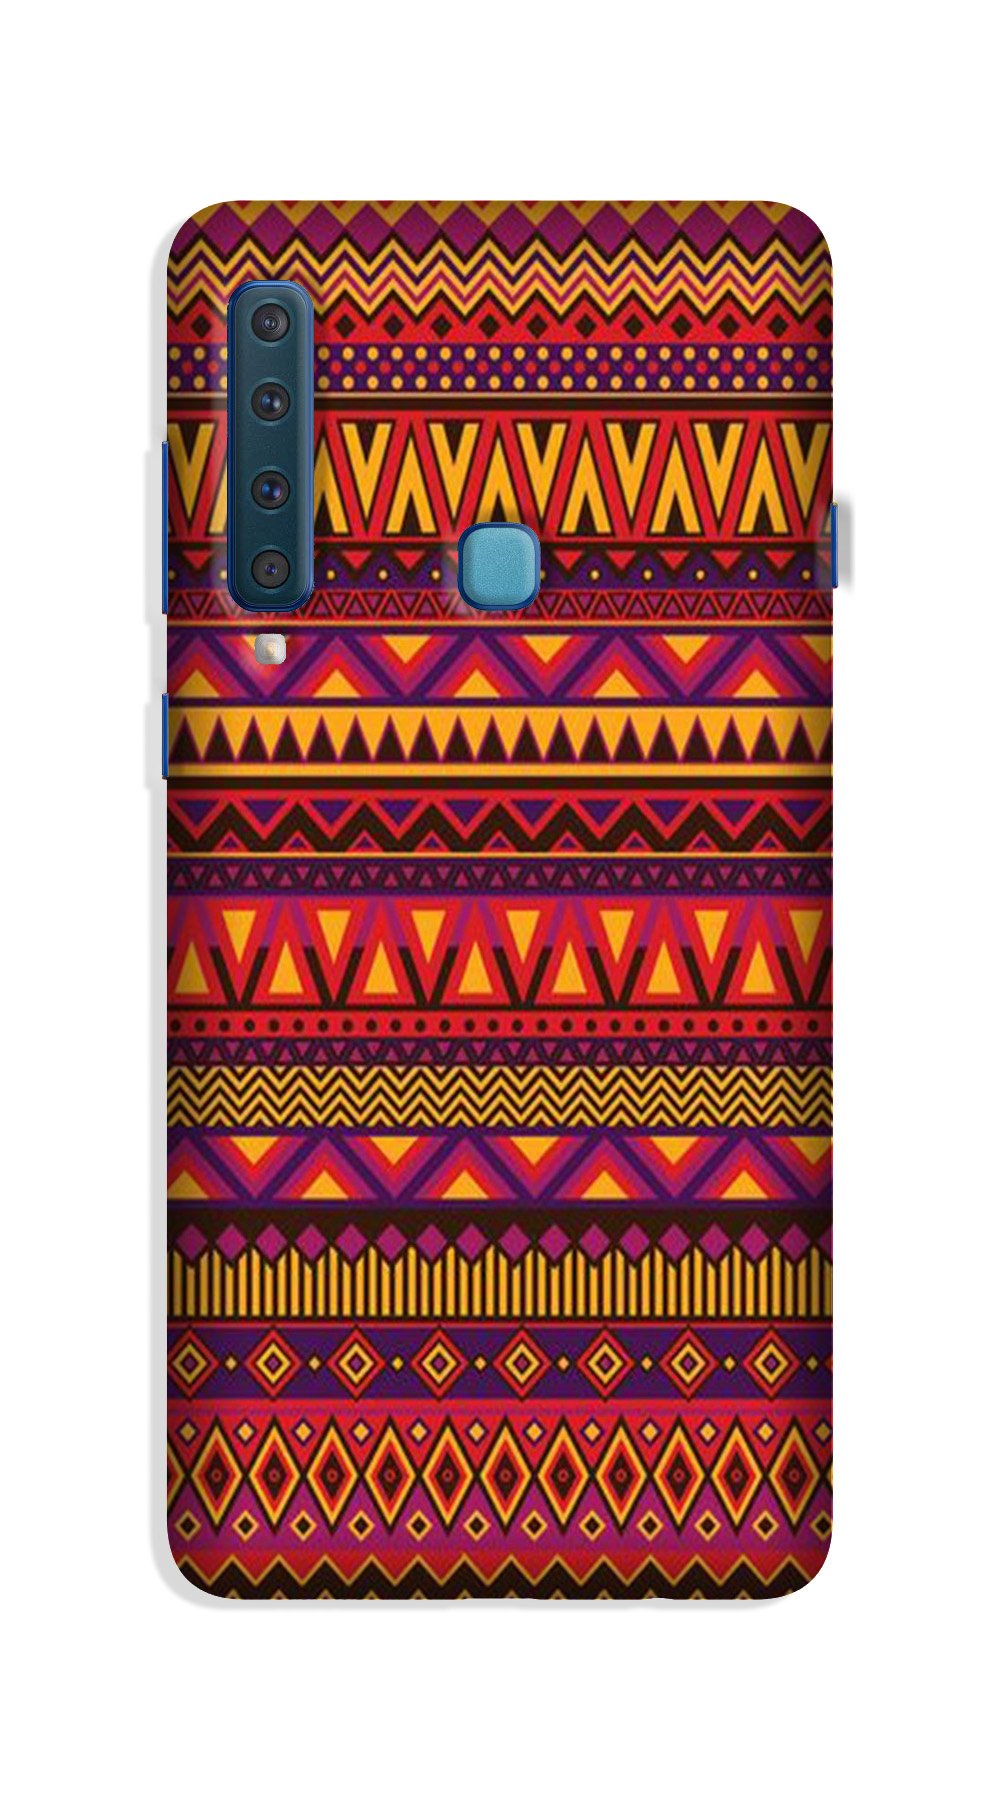 Zigzag line pattern2 Case for Galaxy A9 (2018)